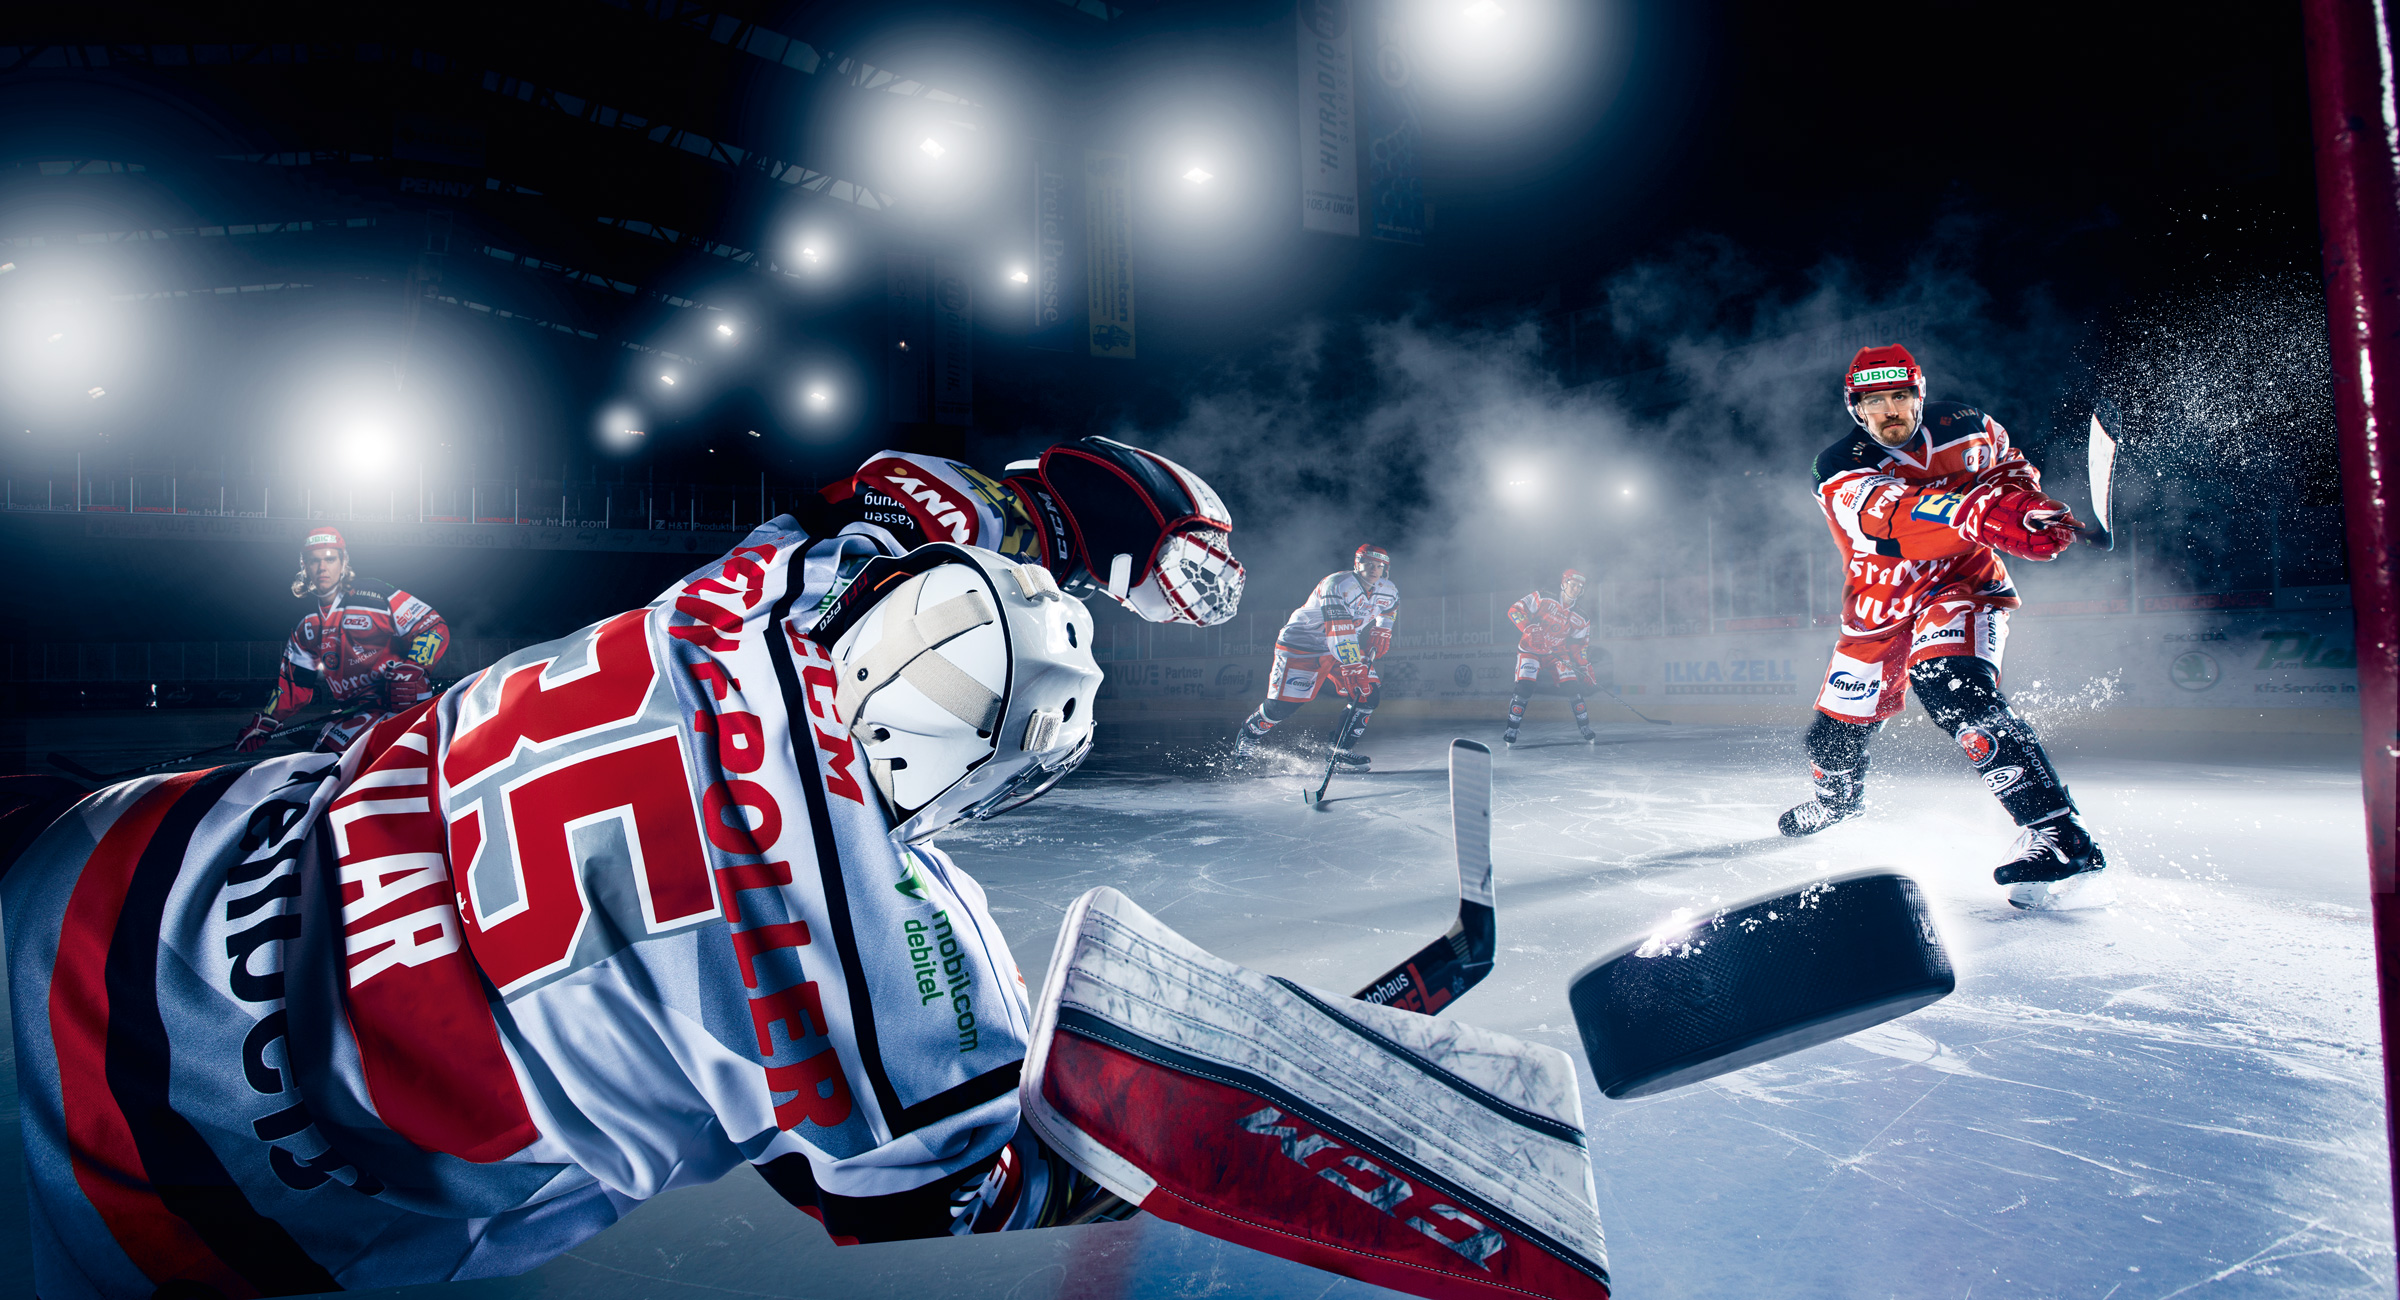 Eishockes Spielsituation aus Sicht des Torwarts. Ice Hockey game action in the point of view of the goalkeeper.